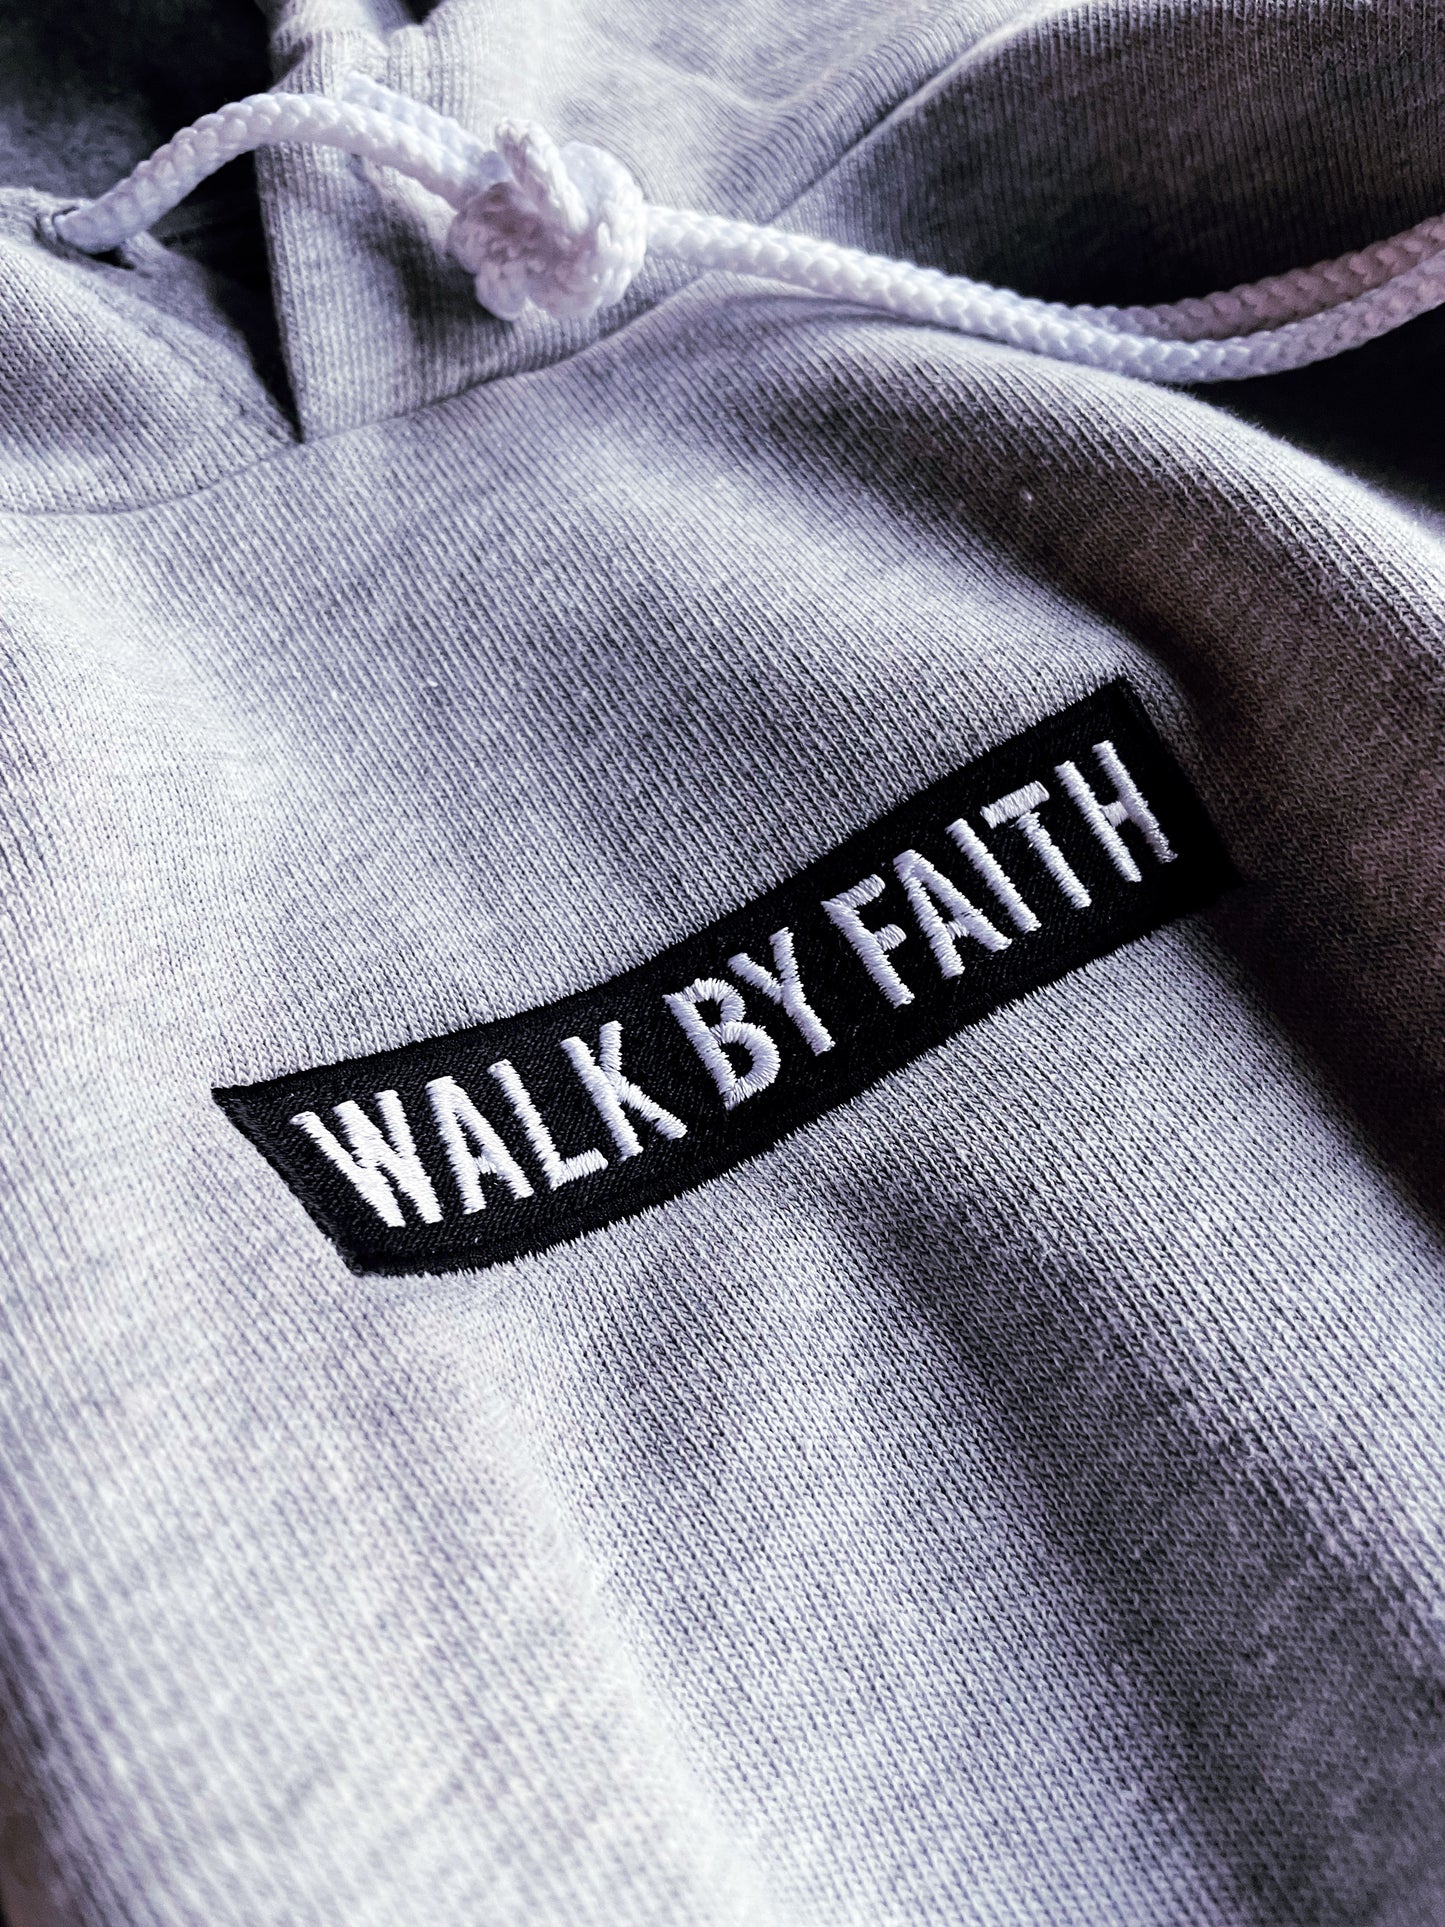 Walk By Faith Adult Embroidered Box Hoodie